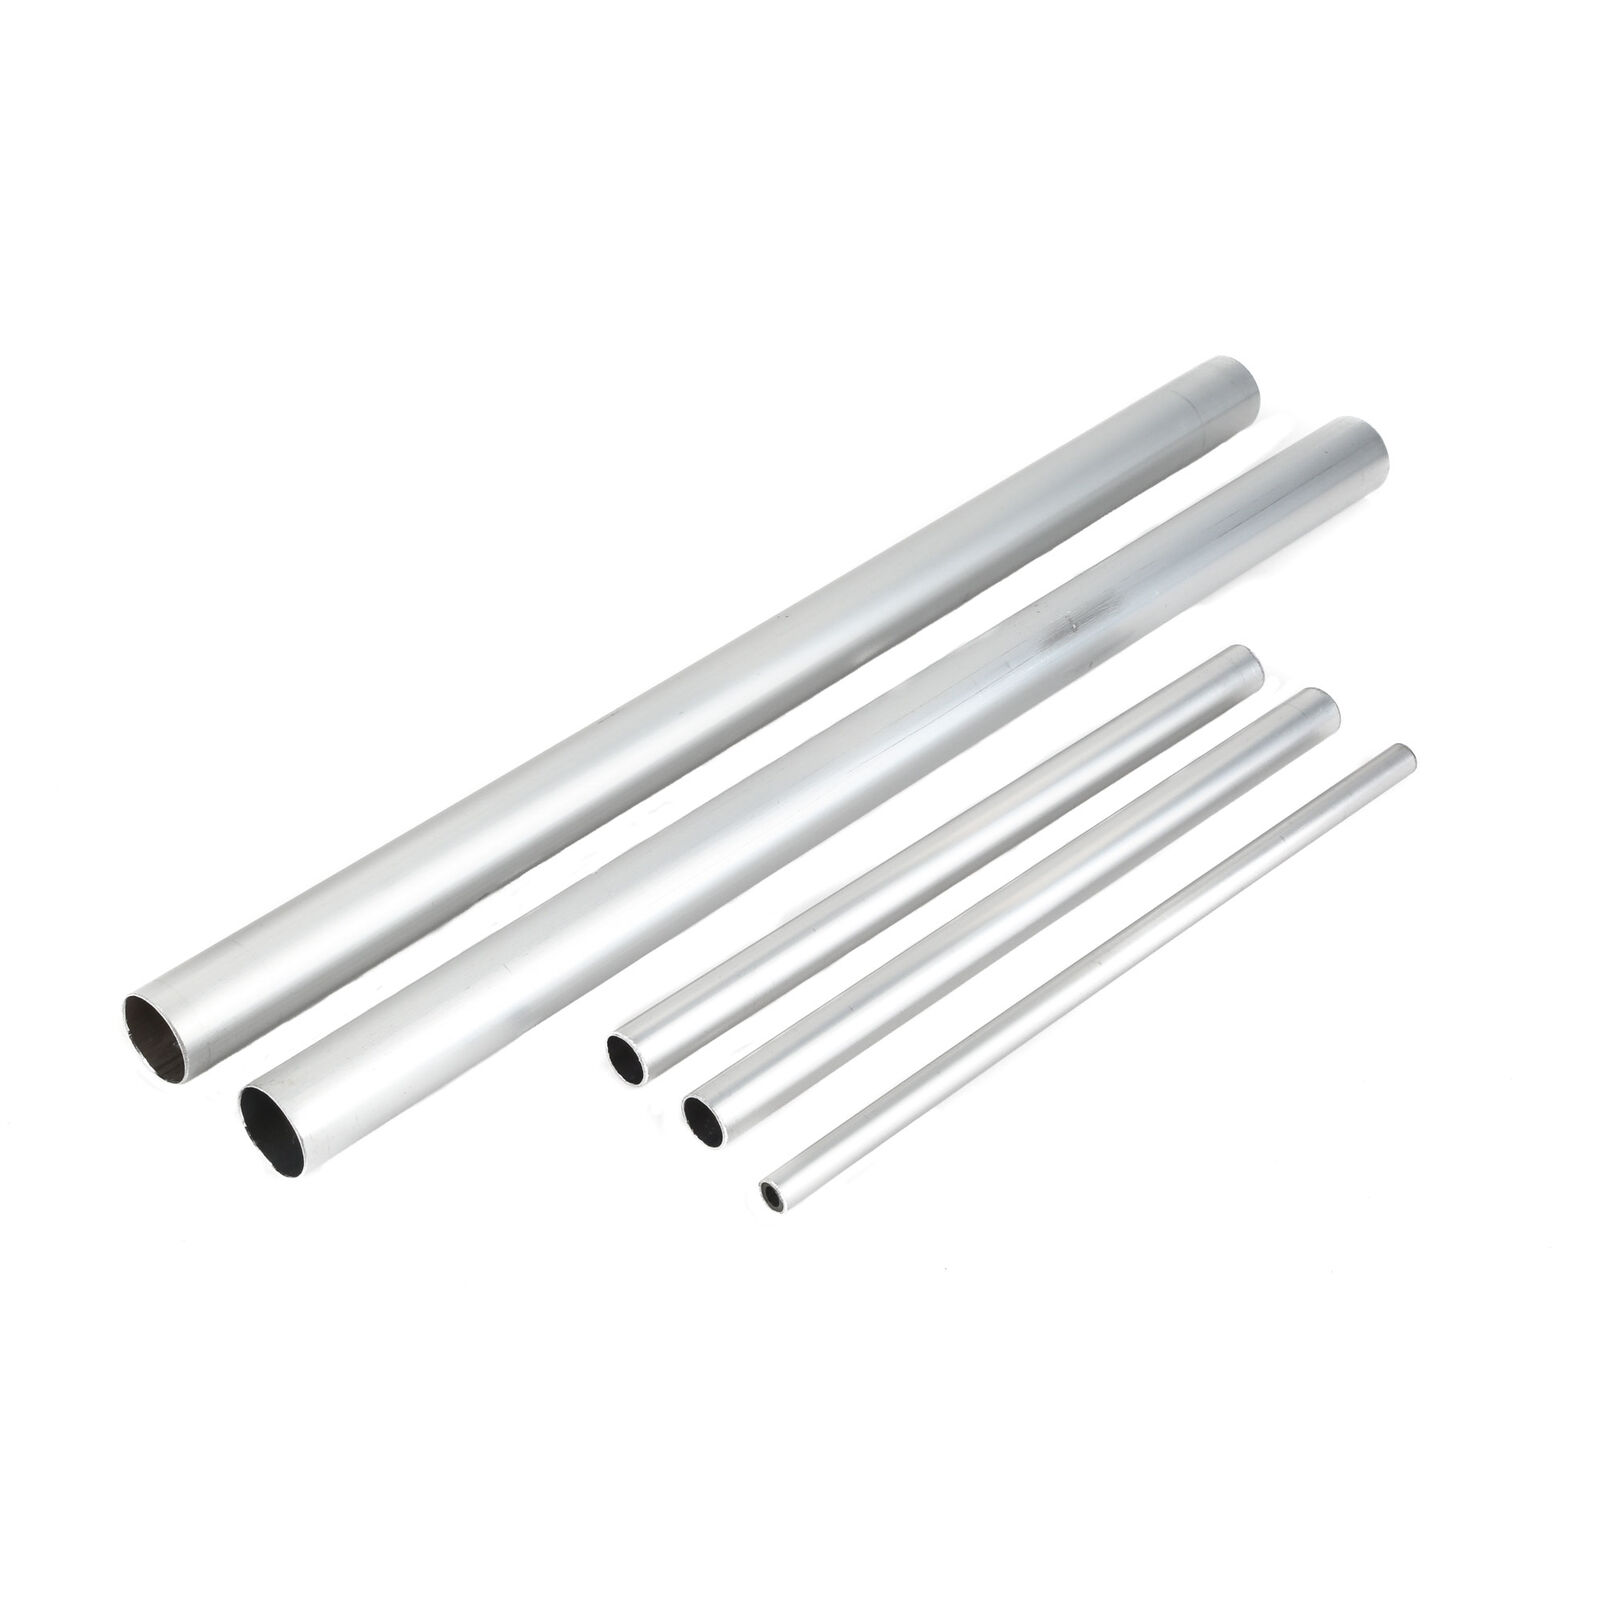 Wing and Stabilizer Tubes: P-51D 60cc